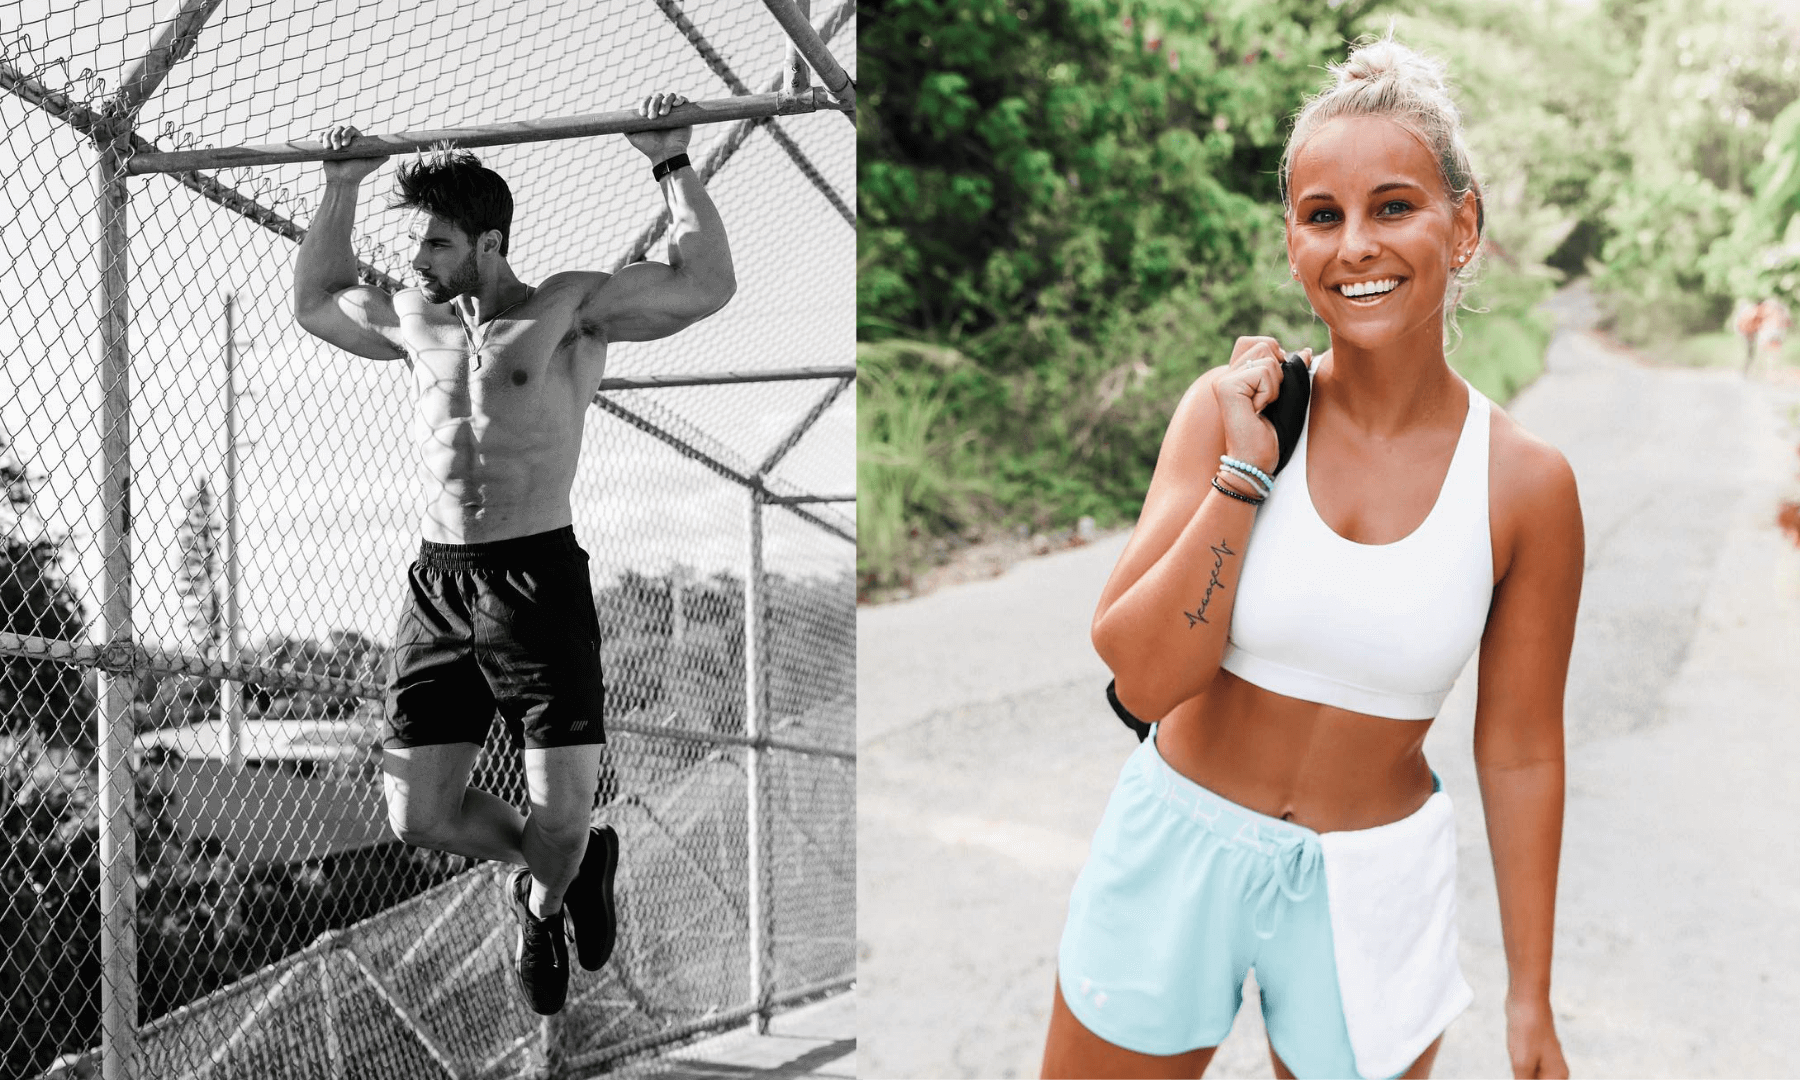 Let’s Stay Connected | We’re Live-Streaming Workouts You Can Do At Home